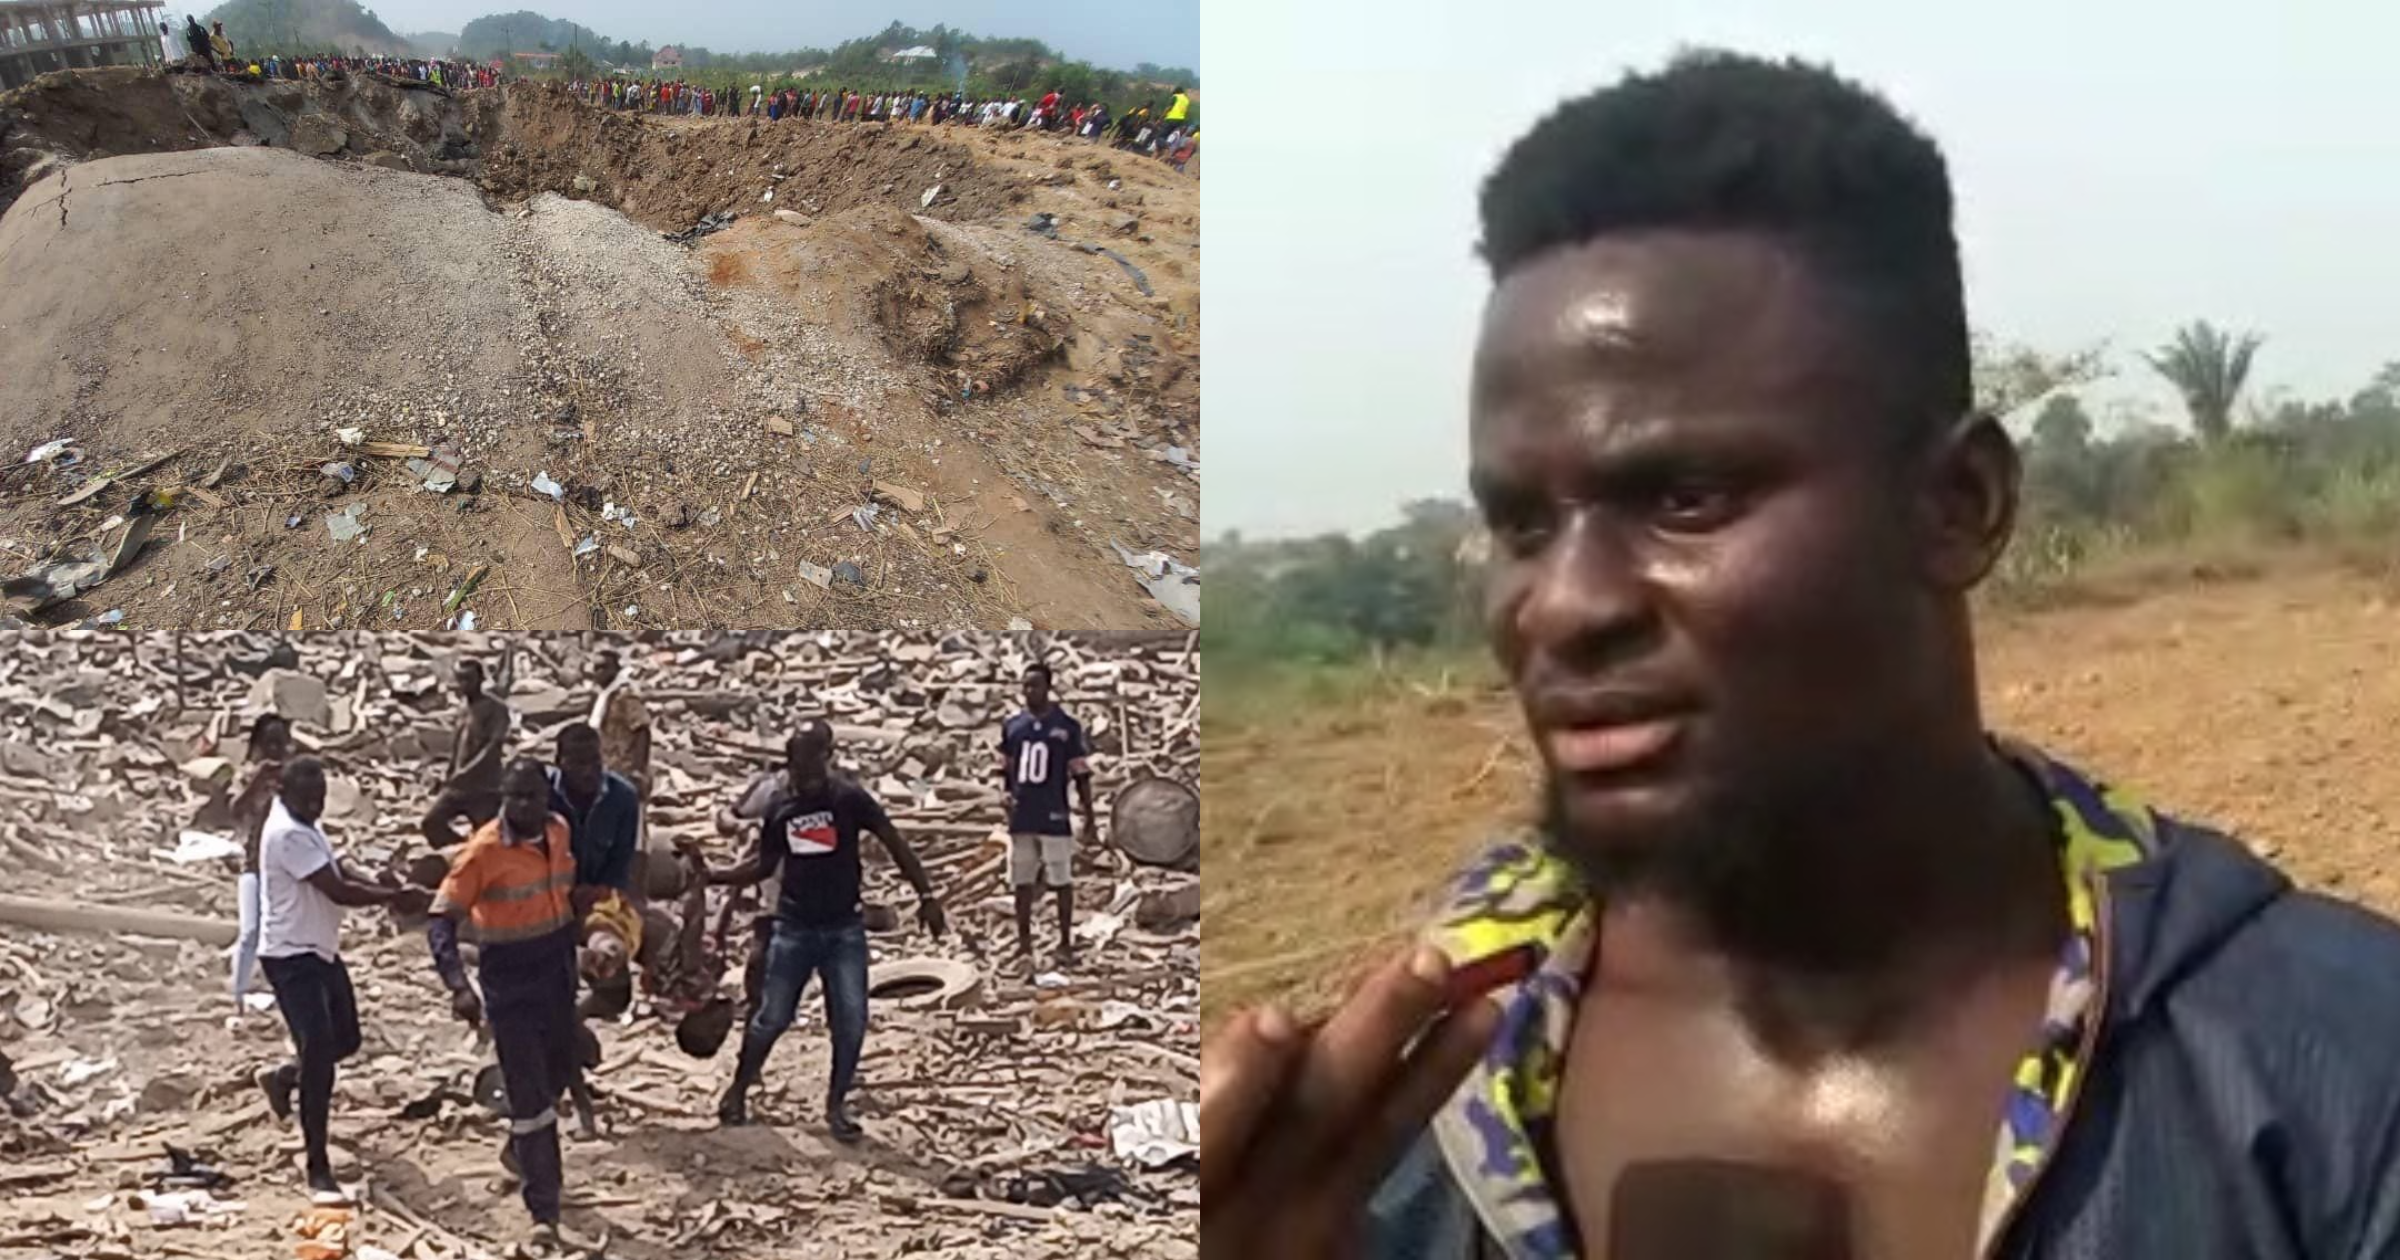 Bogoso explosion: How driver of explosives truck survived and tried to save others, Eyewitness narrates chilling account in latest video